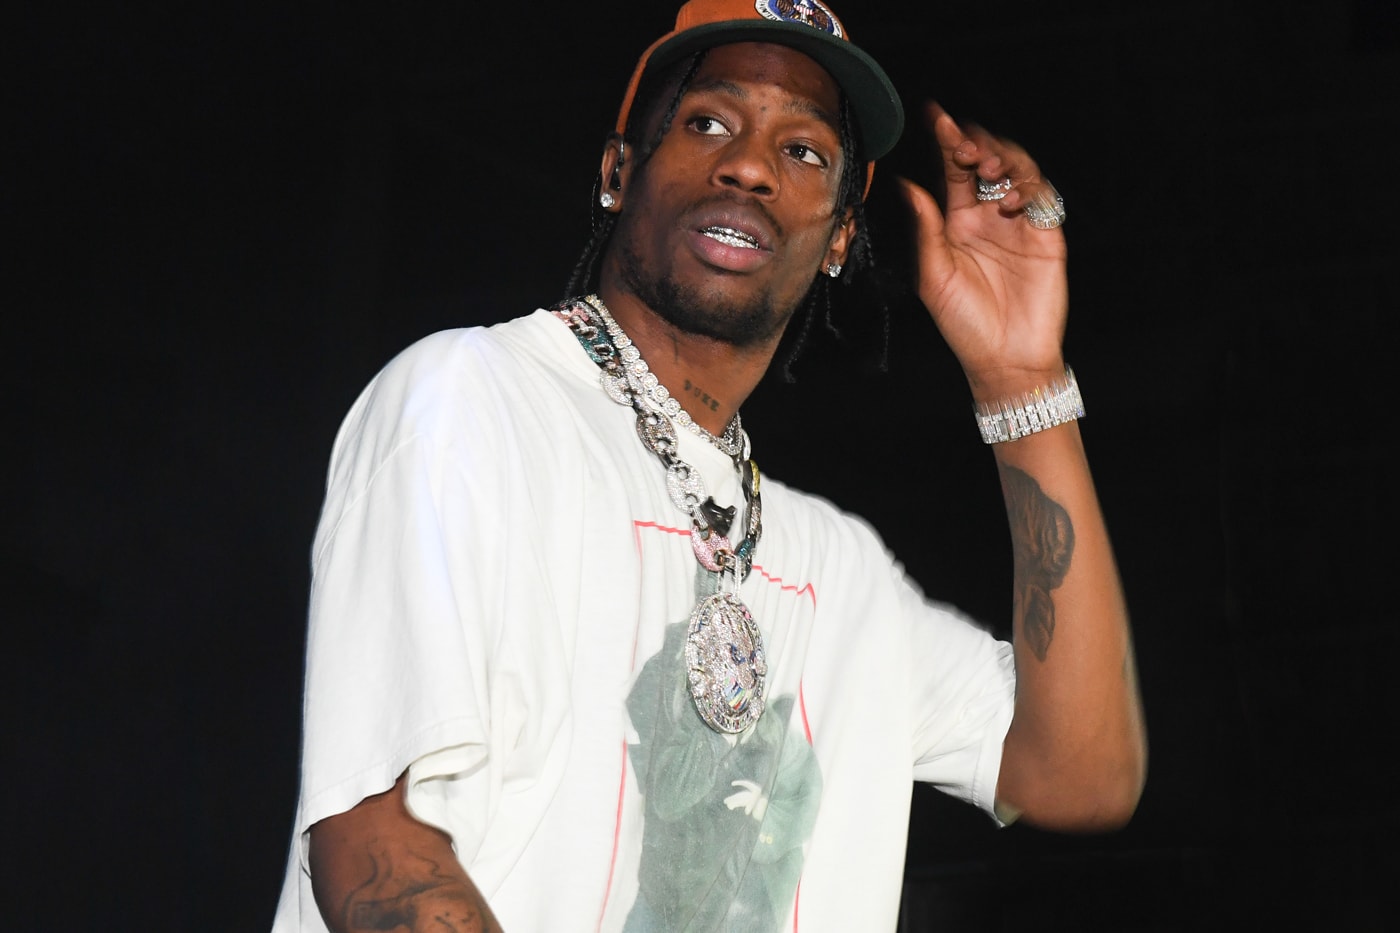 Travis Scott Hints at New Material This Week